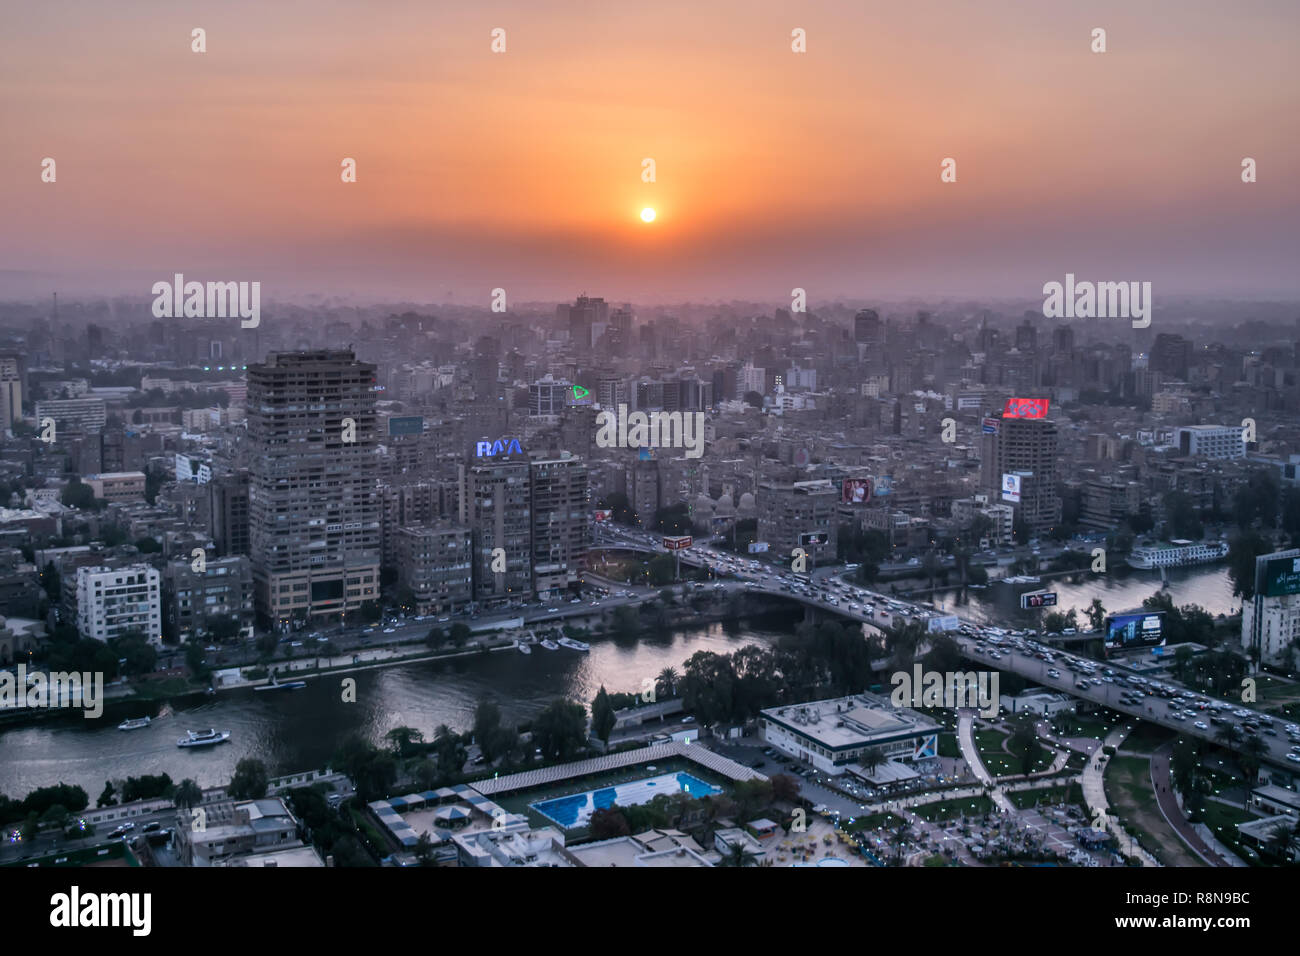 Sunset scene from the top of cairo tower in Egypt shows the nile , the city , buildings and bridge Stock Photo